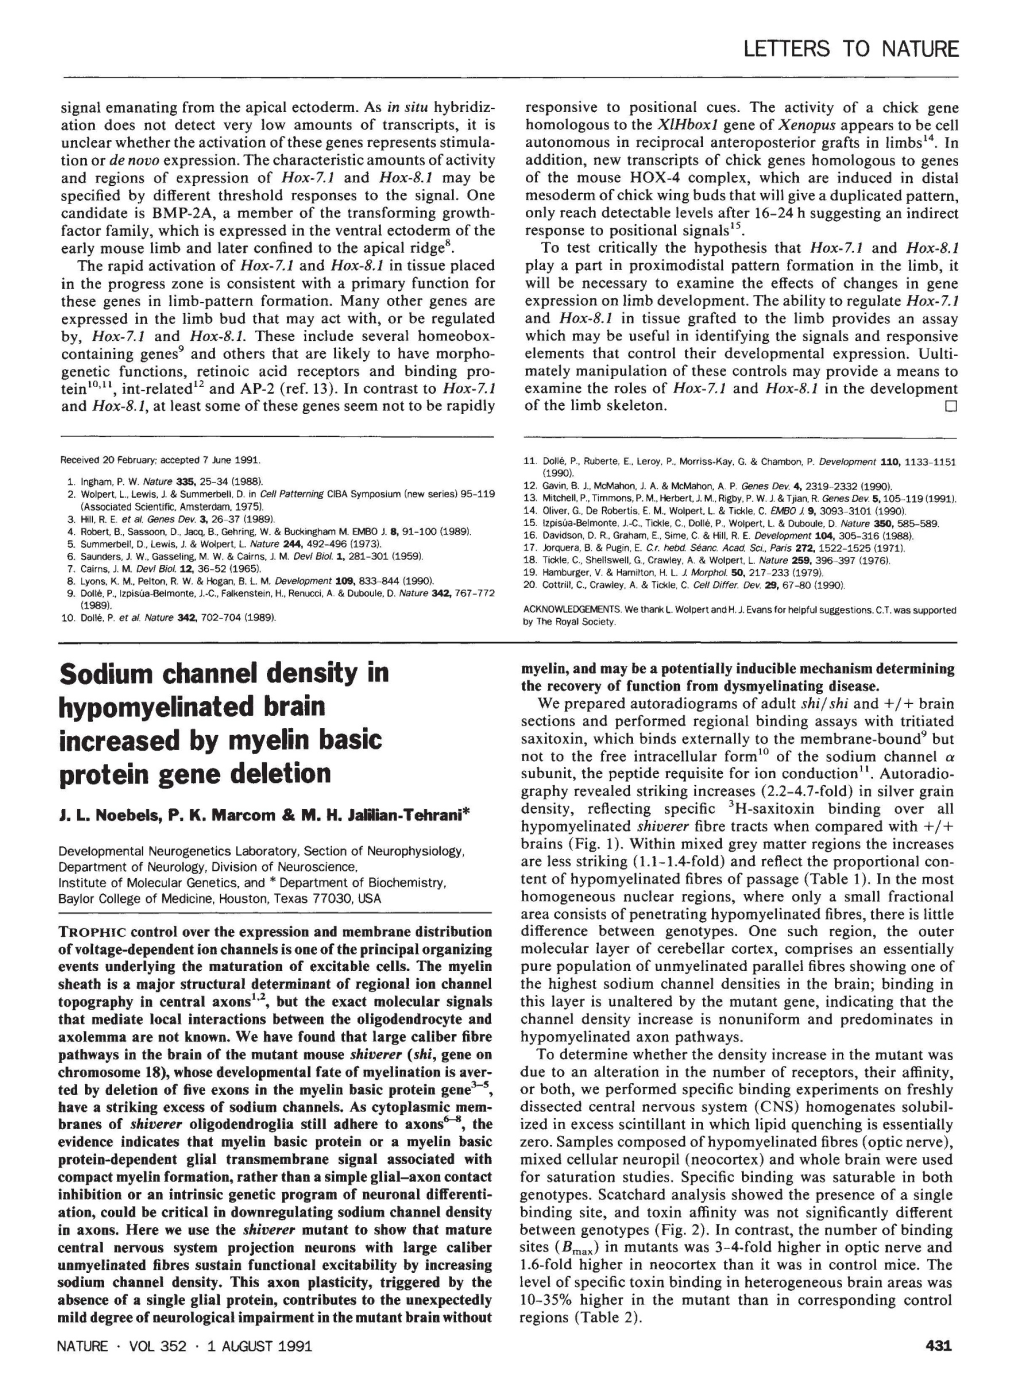 Sodium Channel Density in Hypomyelinated Brain Increased By